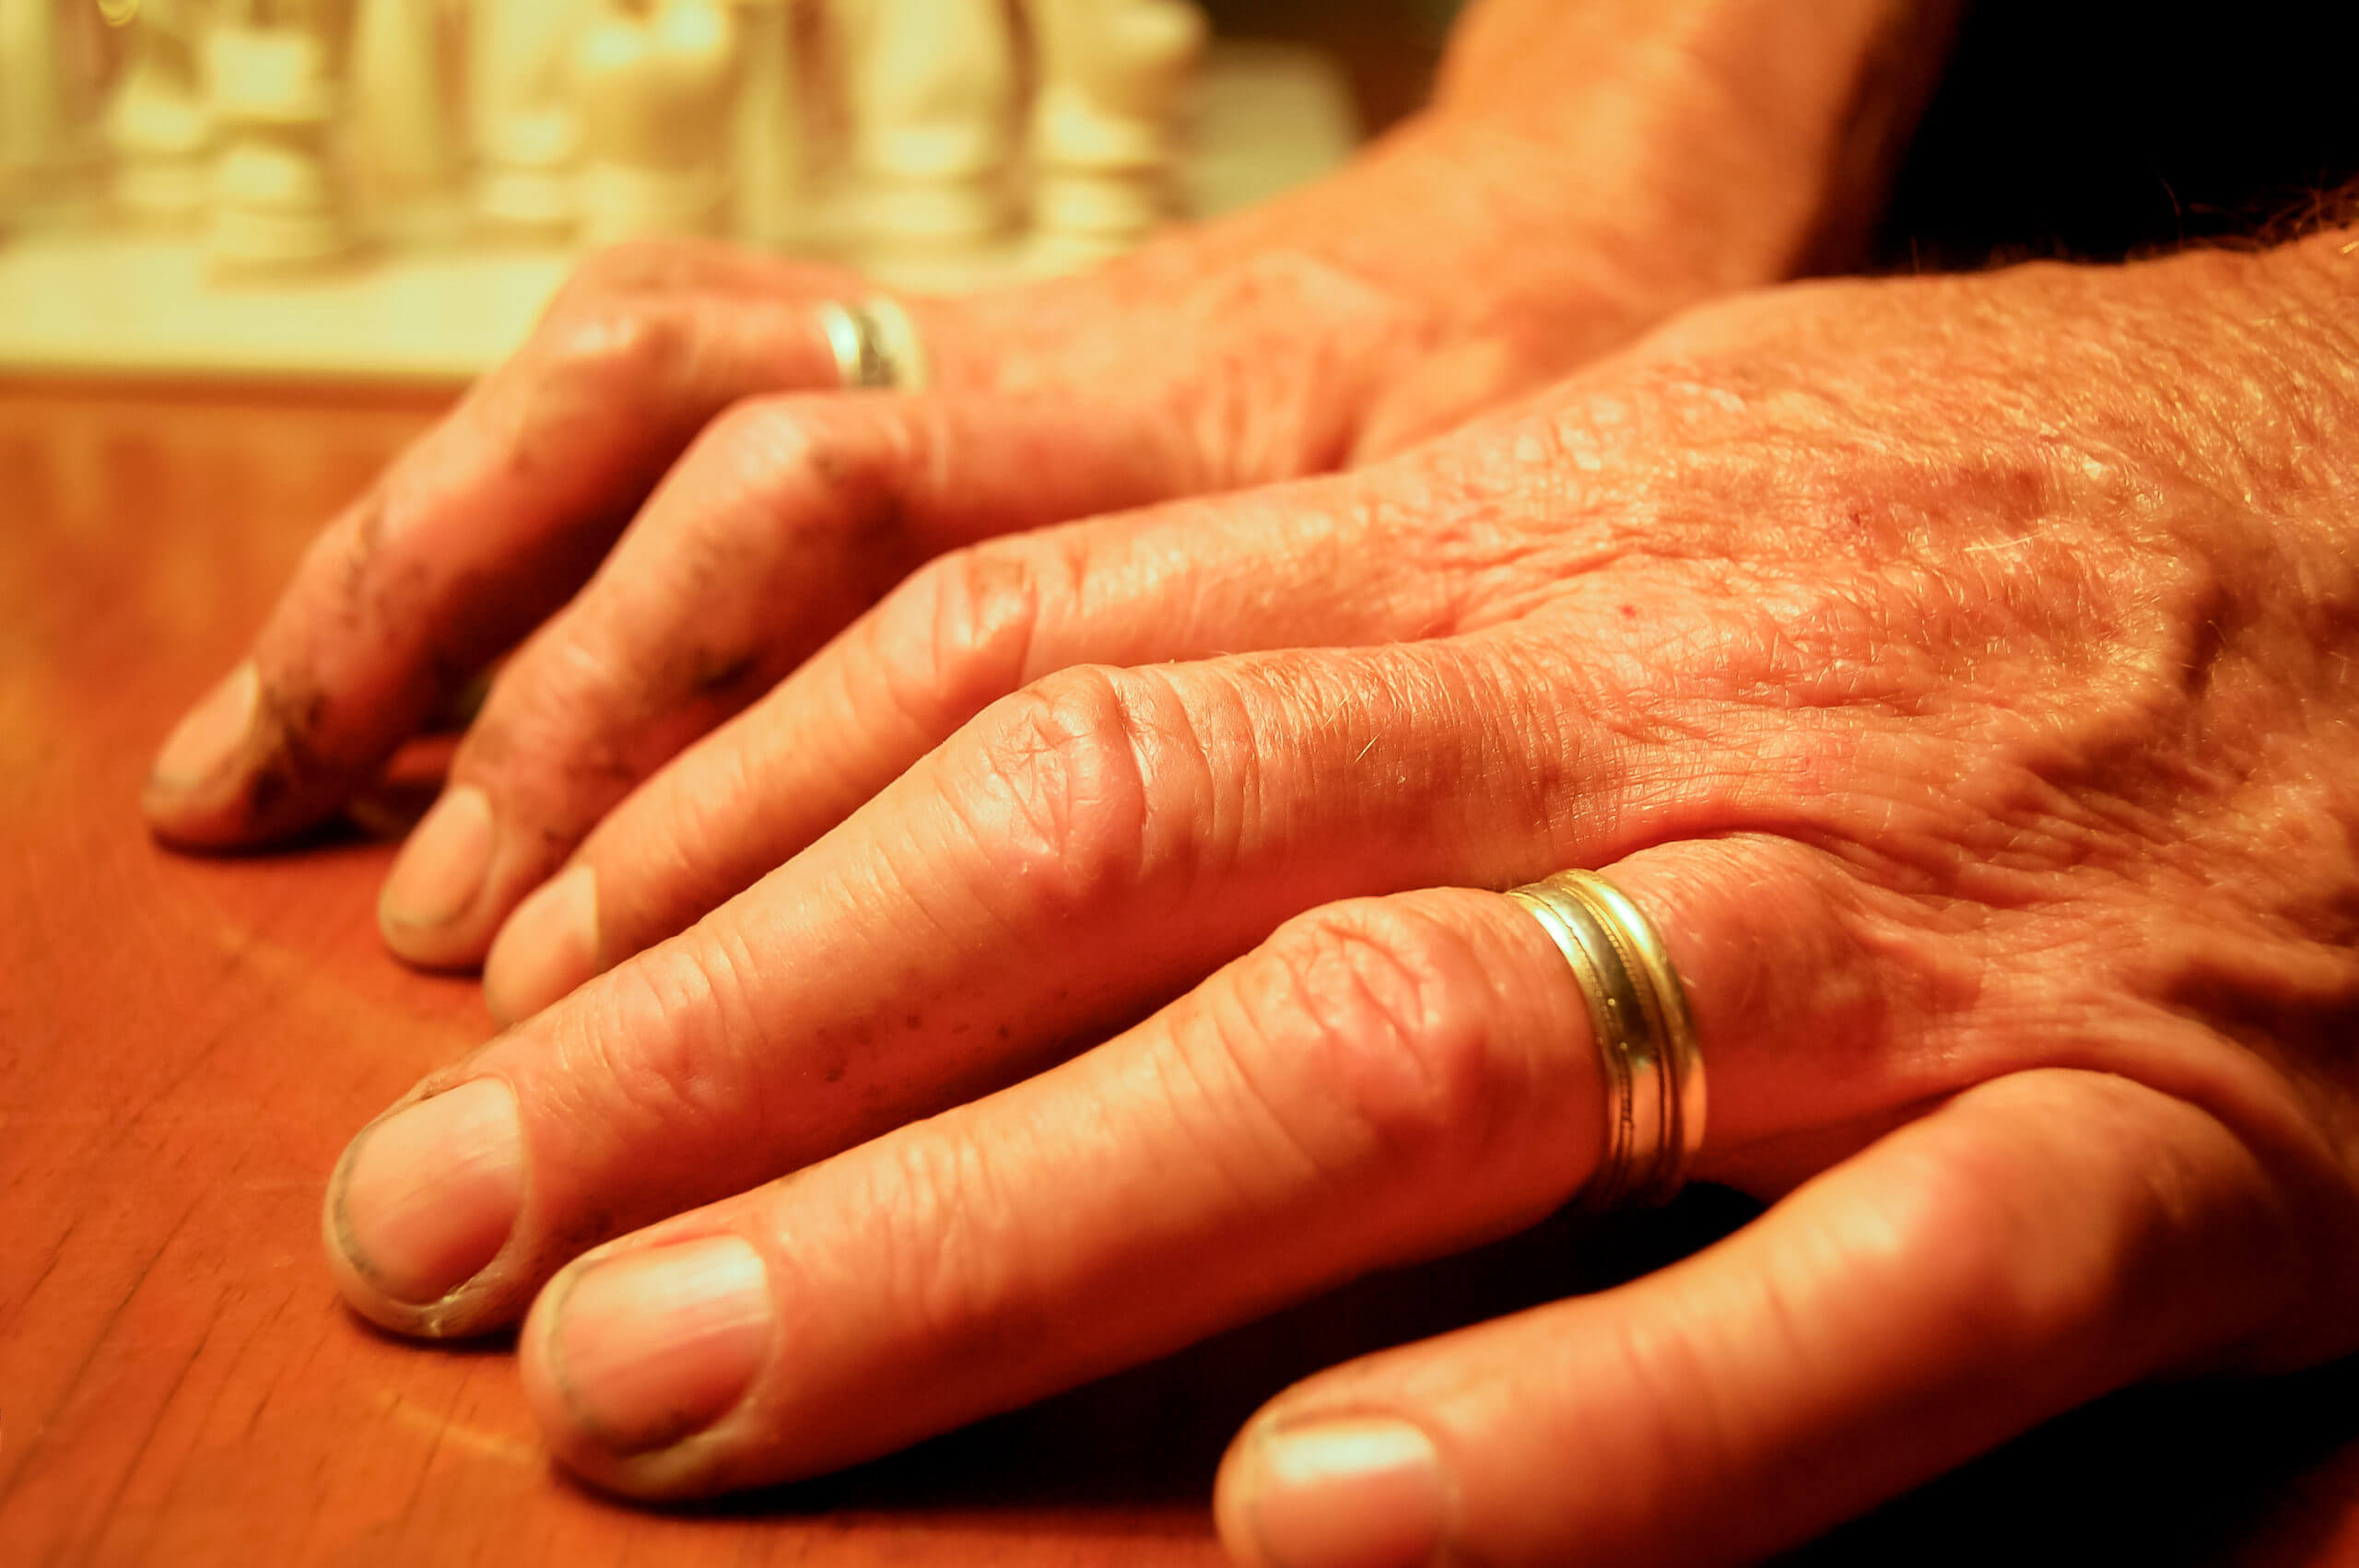 A pair of hands are shown. The hands are wrinkled, tanned, and have dirt under the fingernails and on the skin. Rings are worn on both hands.